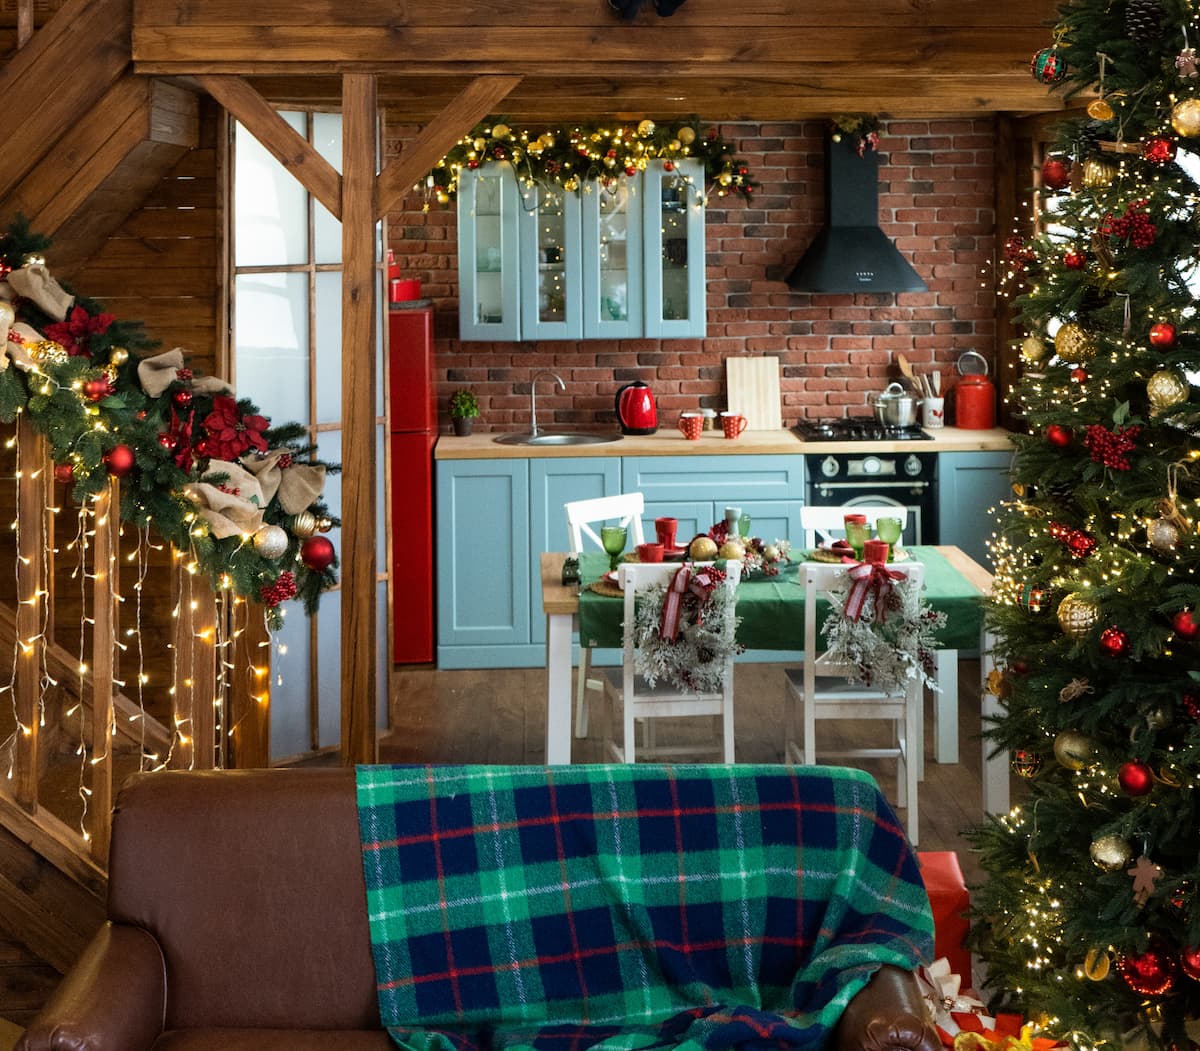 an image of a cabin decorated for Christmas with lots of festive decorations and lights